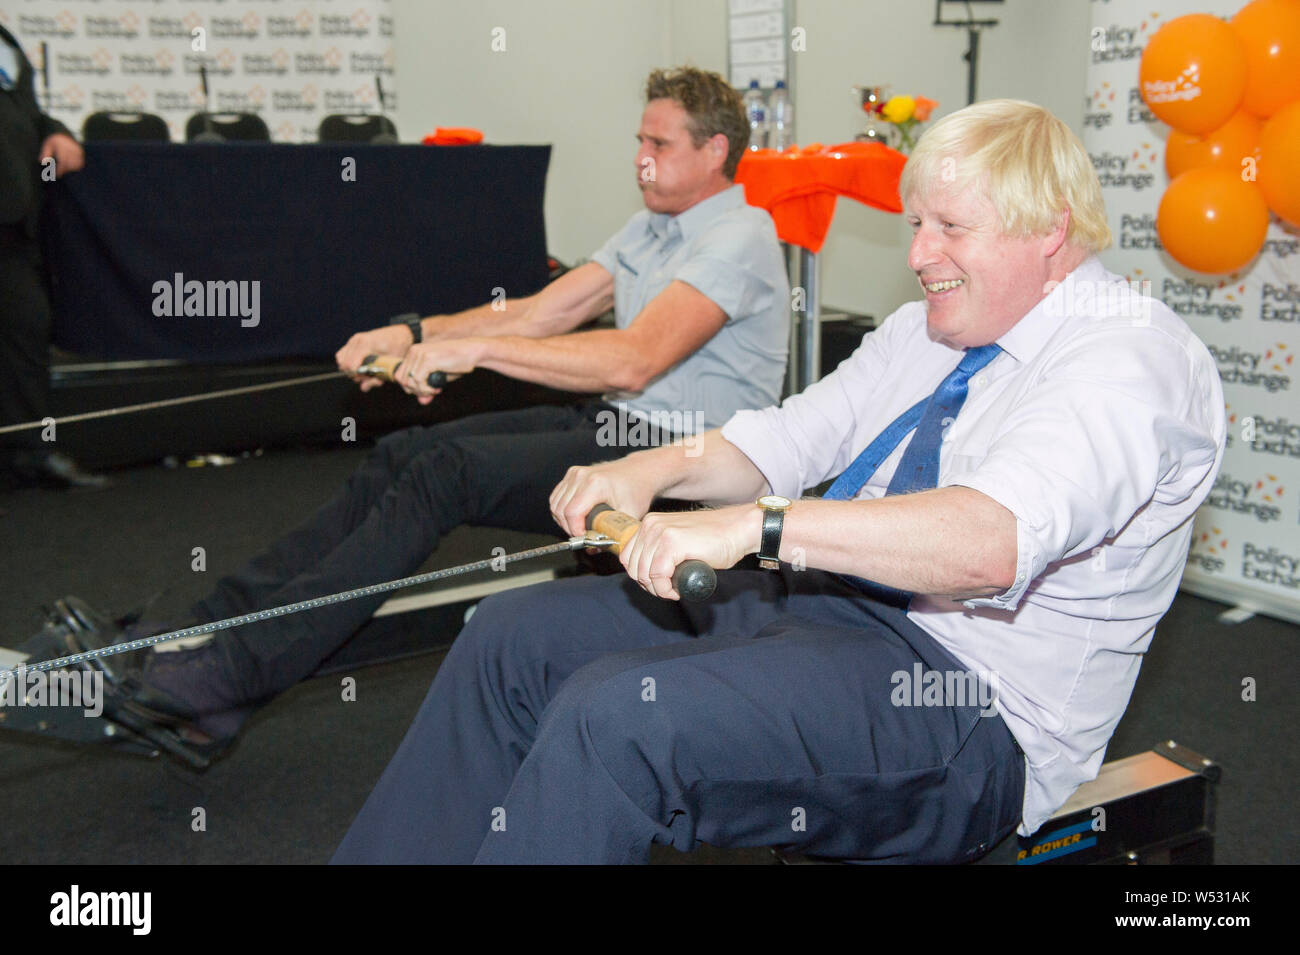 Boris Johnson at a rowing challenge with James Cracknell at the Conservative party conference on October 5, 2015 in Manchester, England Stock Photo